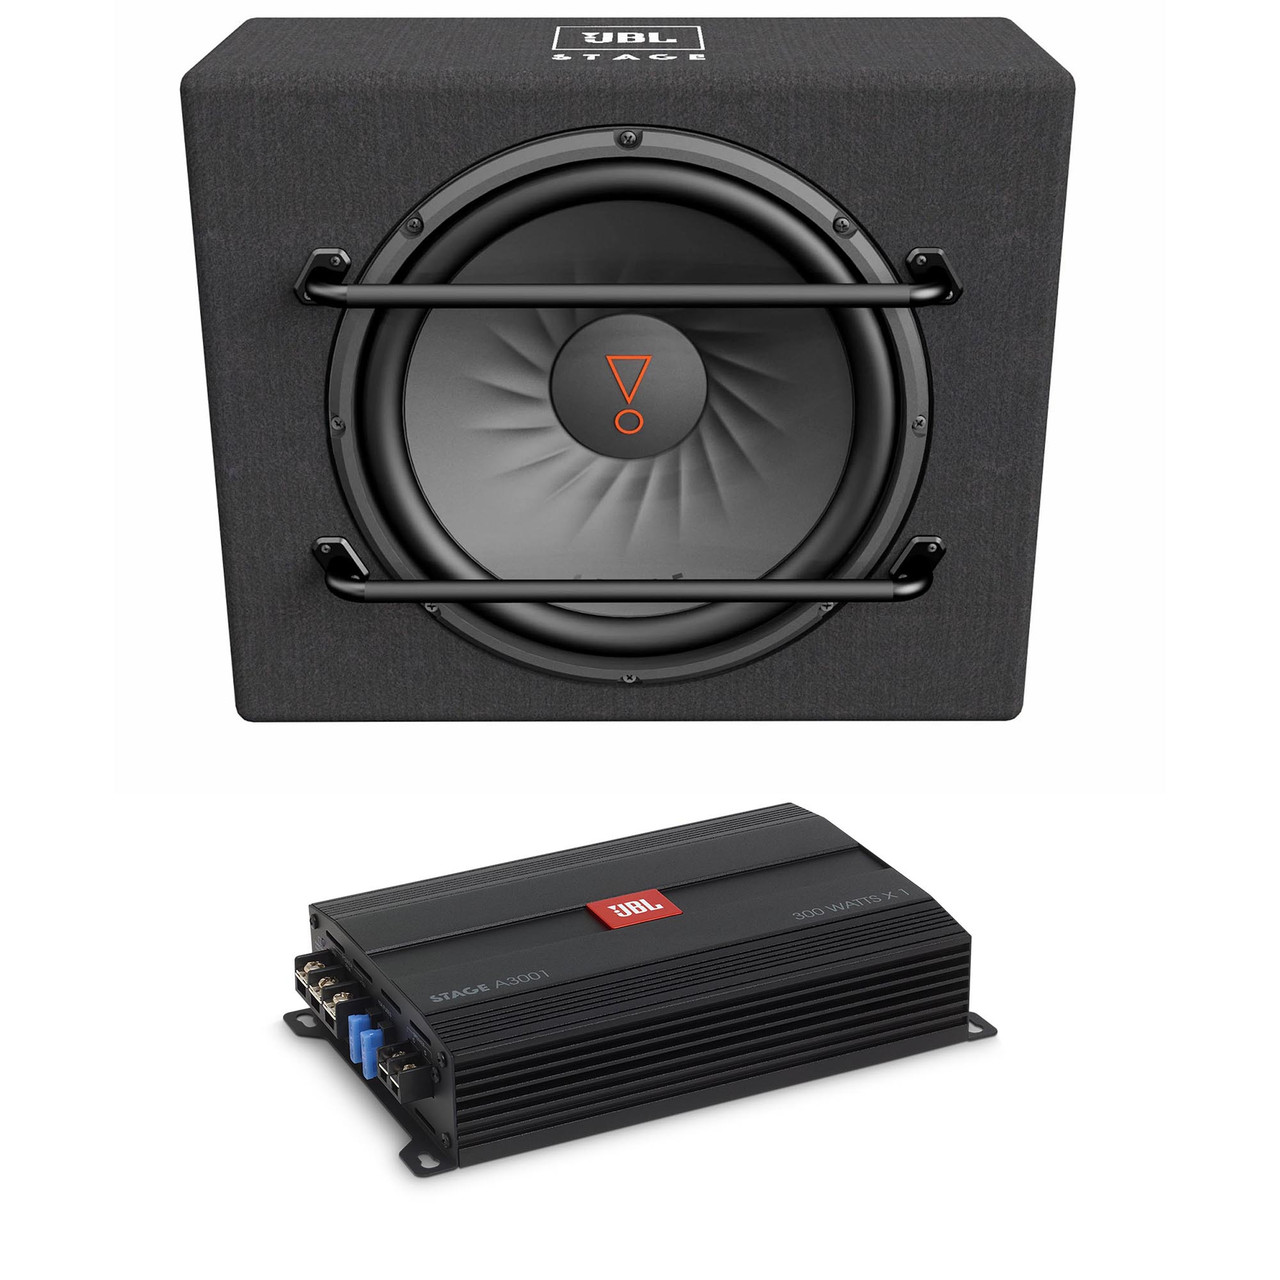 JBL STAGE1200S 1-12" Loaded Subwoofer with JBL STAGE A3001 300 Watt Mono Amplifier - Creative Audio